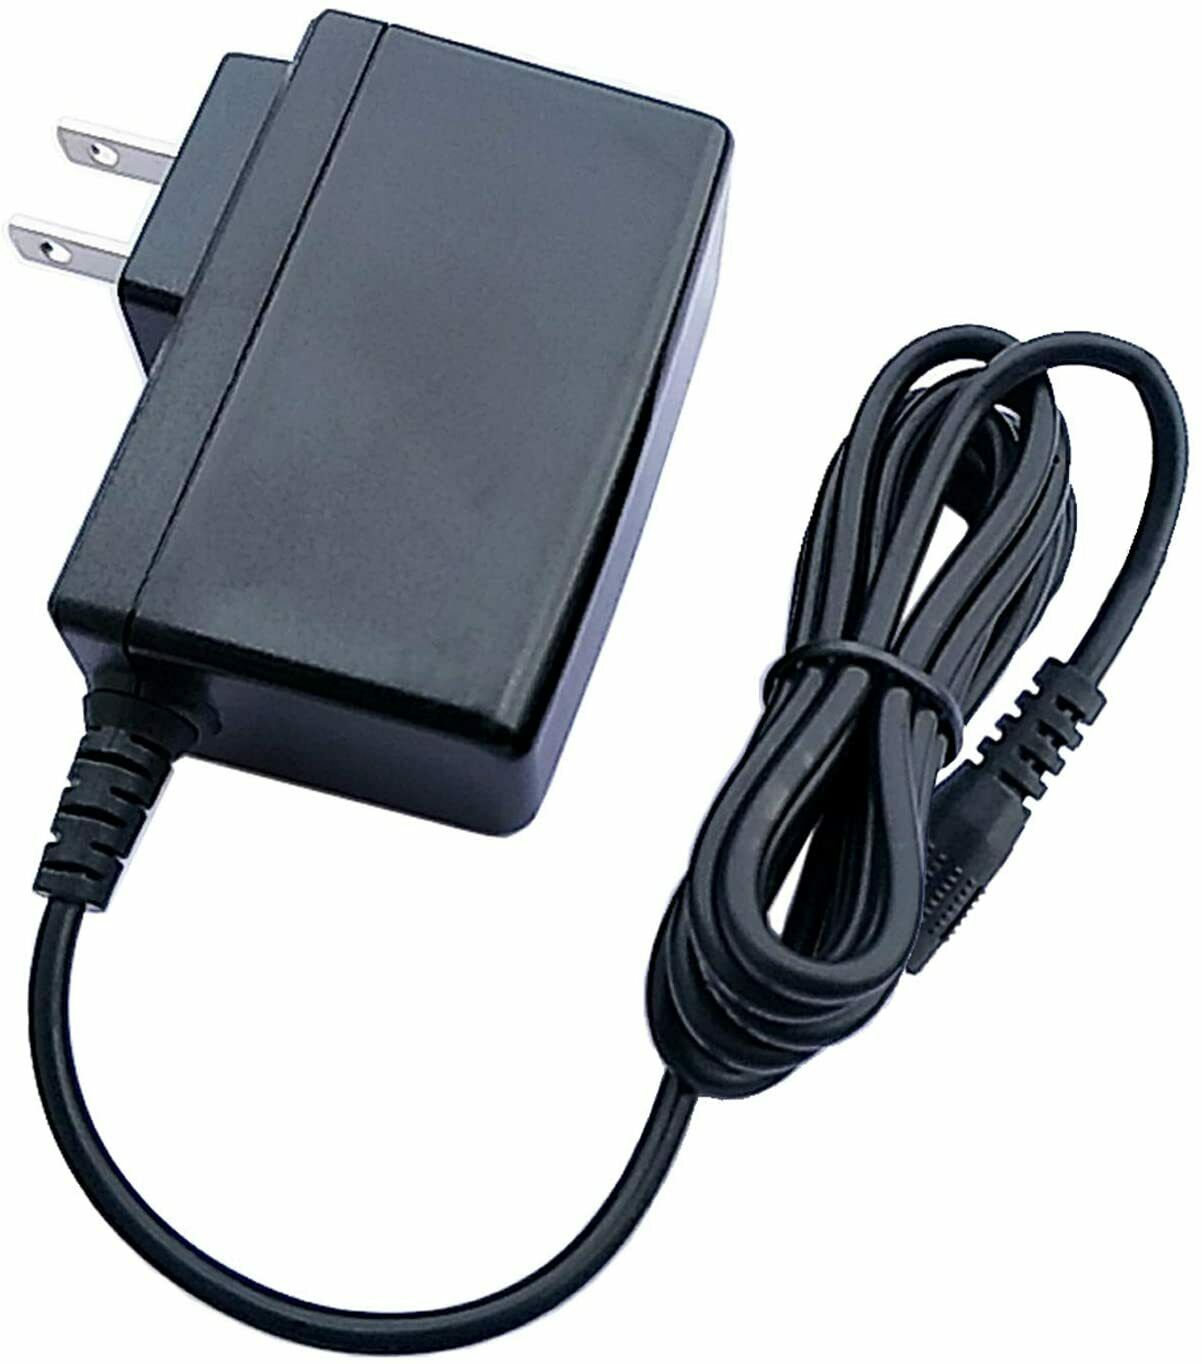 Ac Adapter fit My Keepon Interactive Dancing Robot Toy Charger Power Supply Type: AC/DC adapter Home Charger Compatib - Click Image to Close